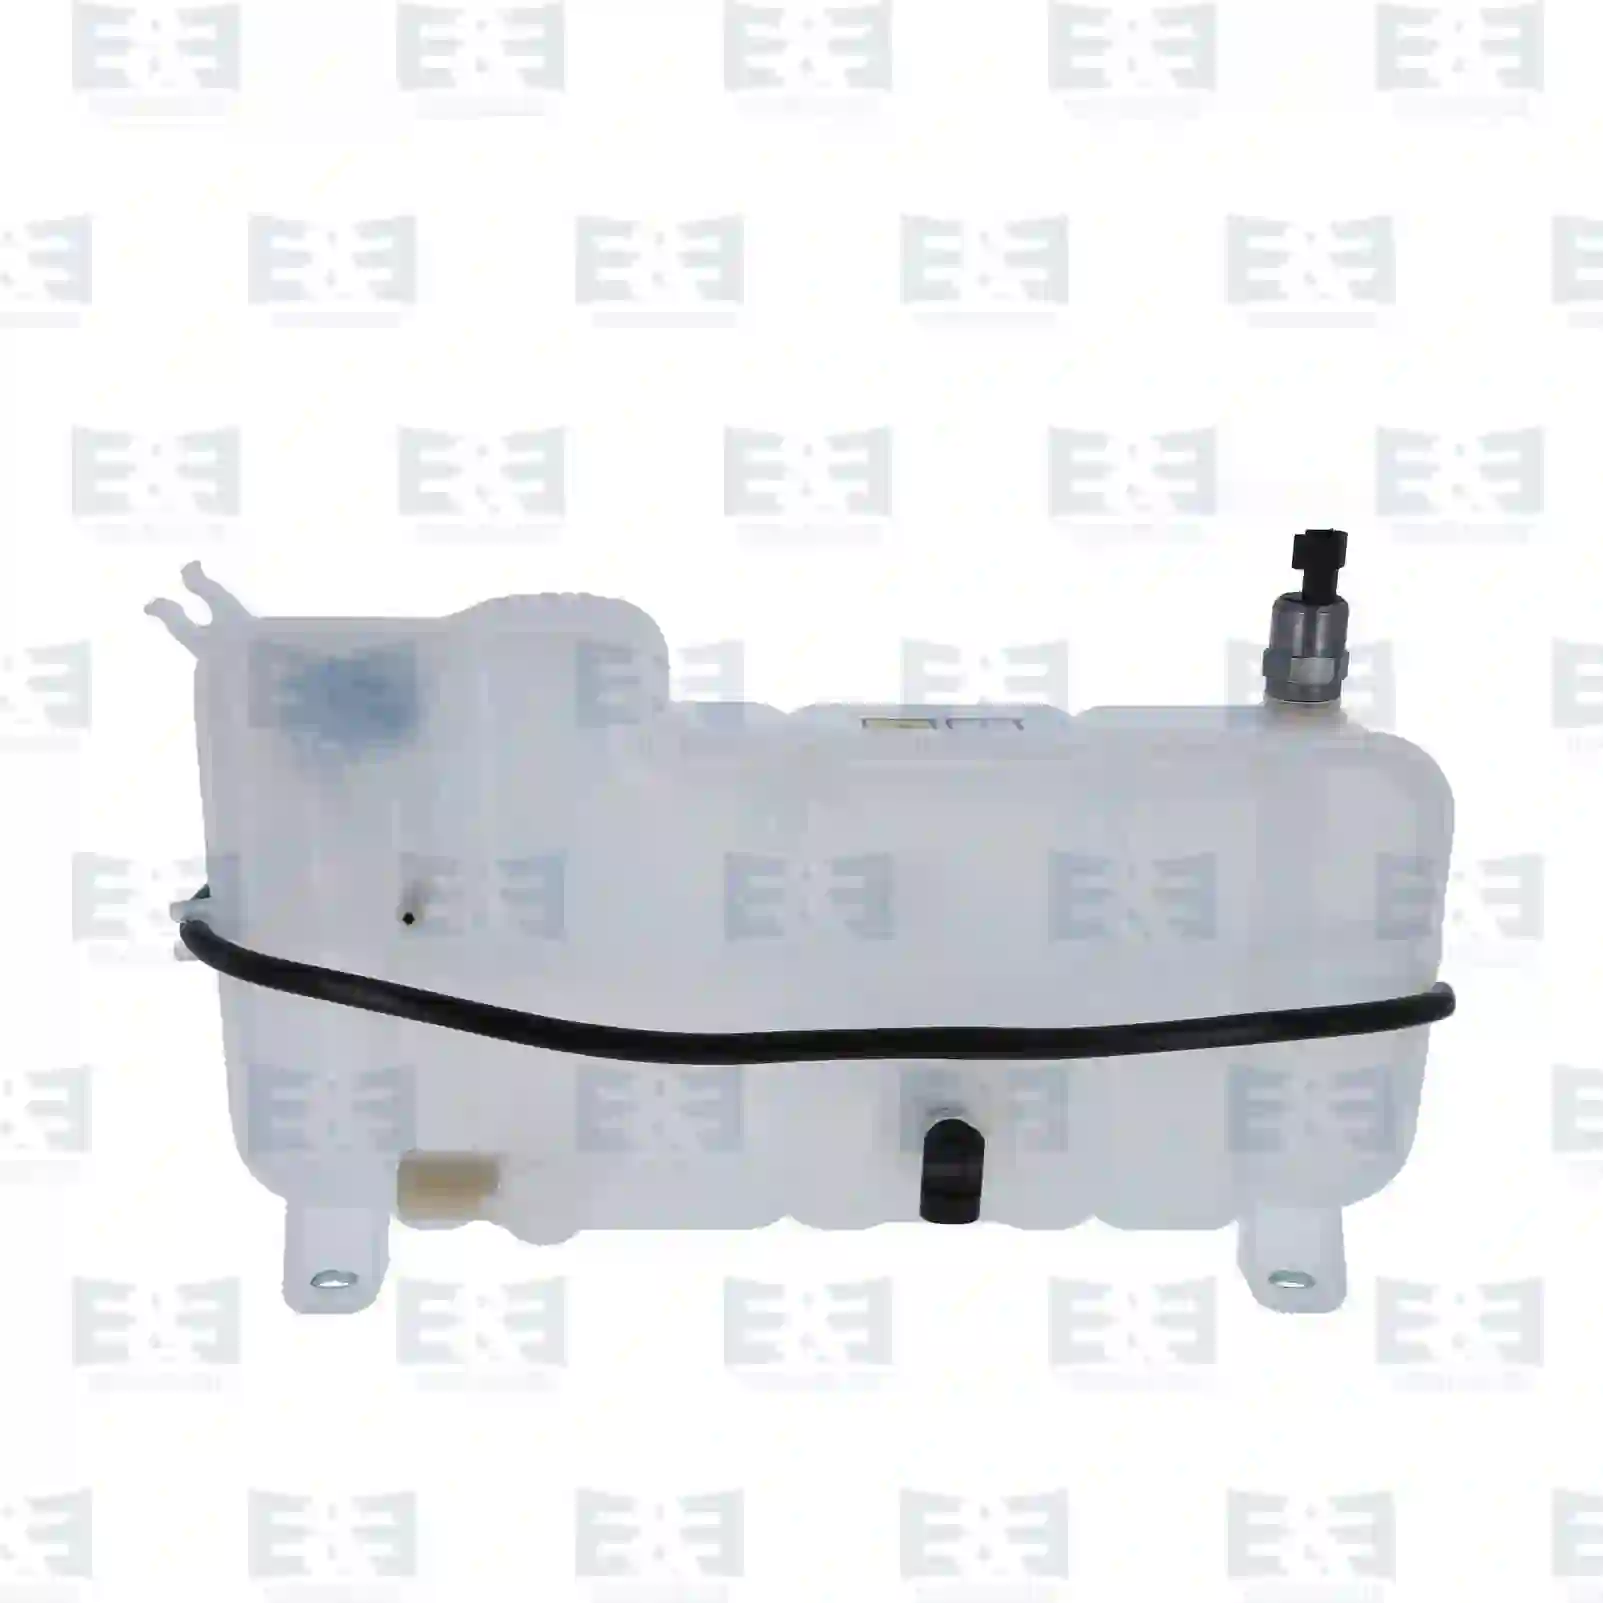 Expansion tank, with sensor, with cover, 2E2203203, 504136607 ||  2E2203203 E&E Truck Spare Parts | Truck Spare Parts, Auotomotive Spare Parts Expansion tank, with sensor, with cover, 2E2203203, 504136607 ||  2E2203203 E&E Truck Spare Parts | Truck Spare Parts, Auotomotive Spare Parts